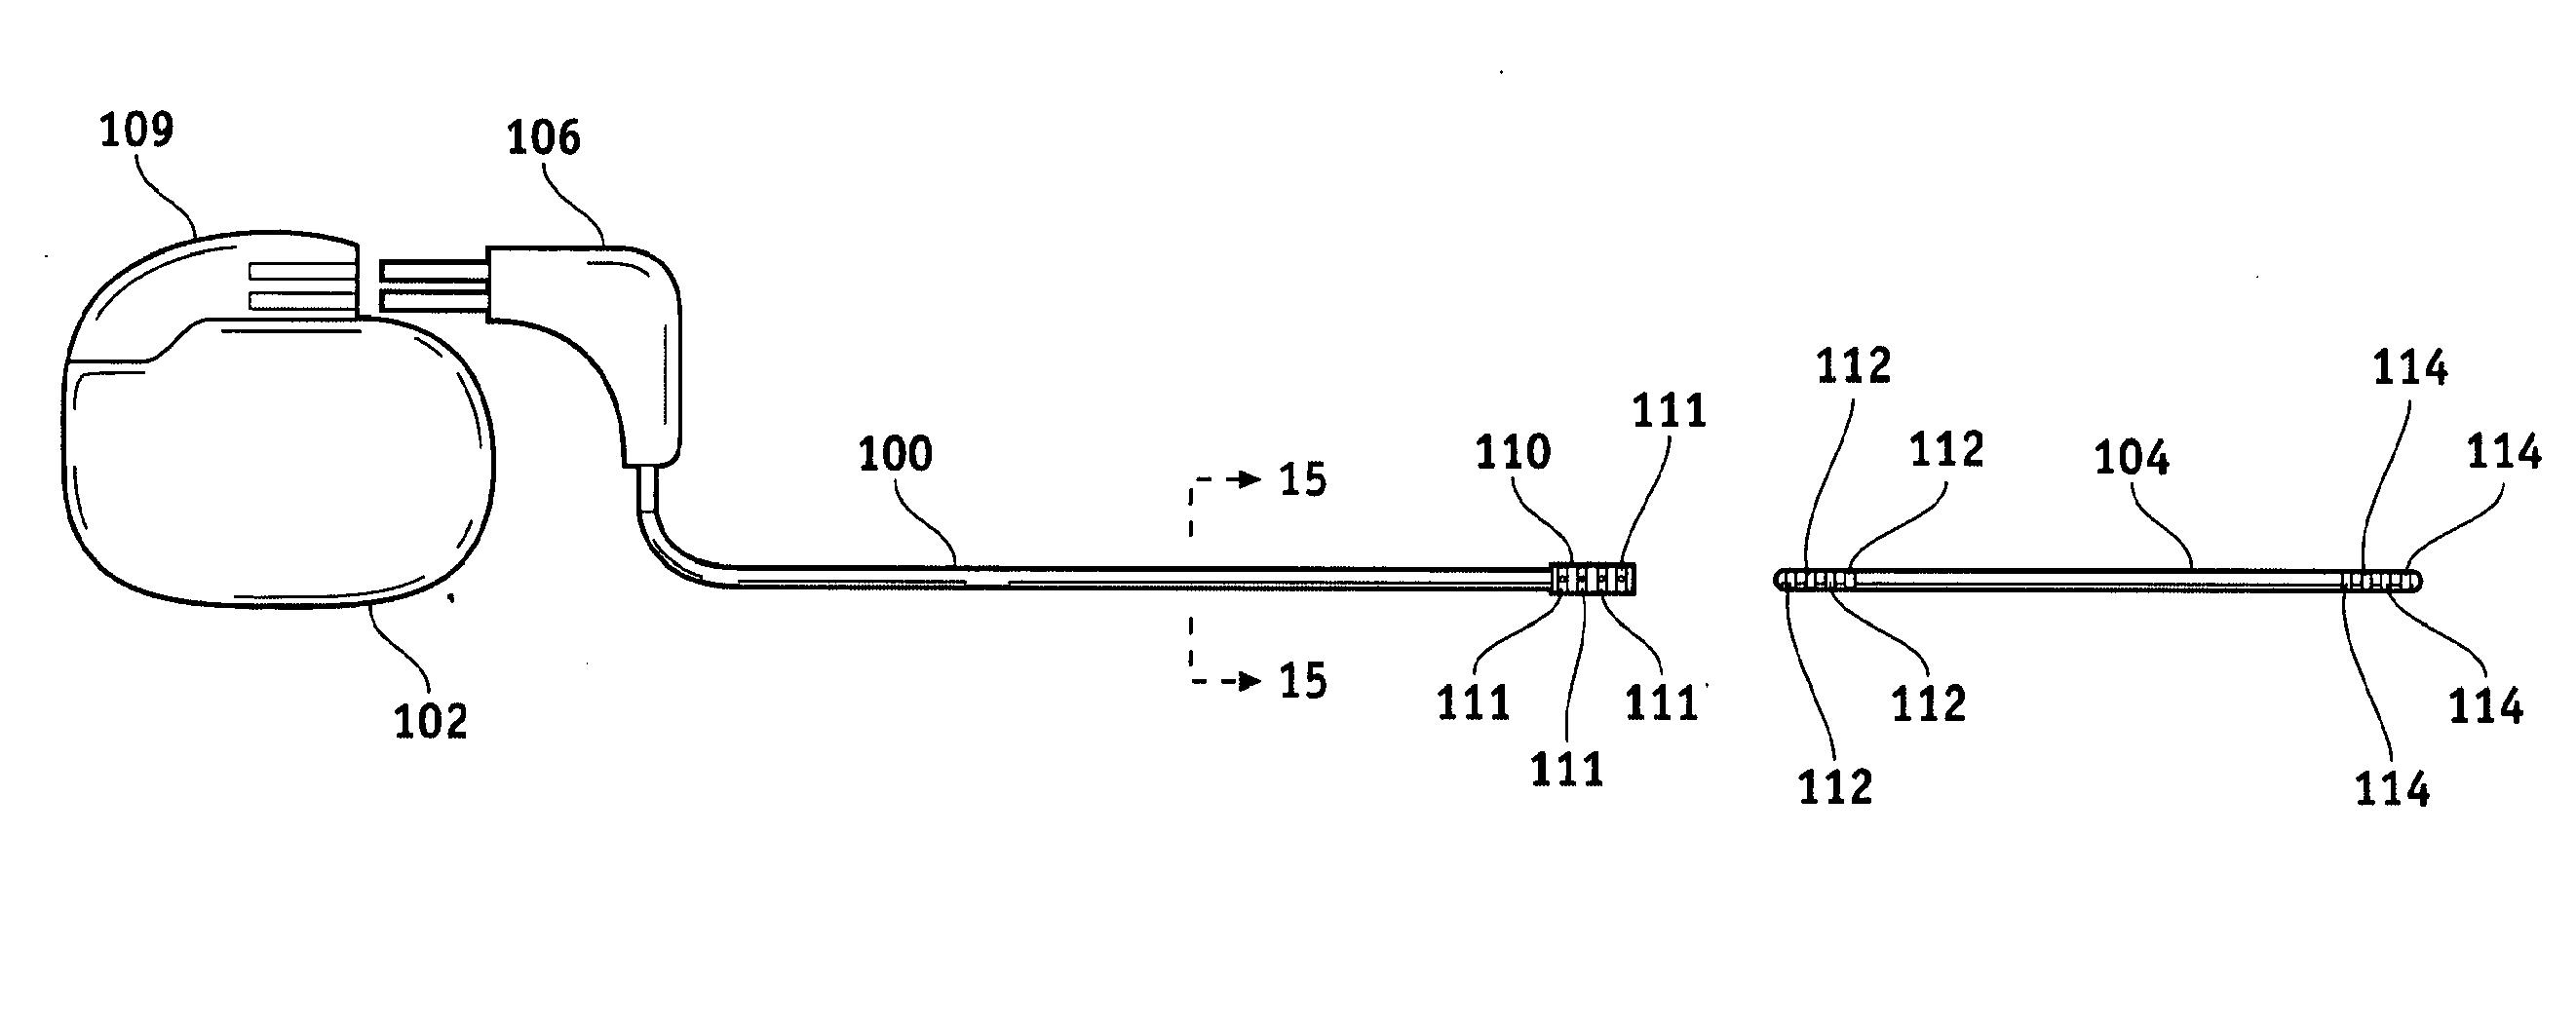 Lead Electrode for Use in an MRI-Safe Implantable Medical Device